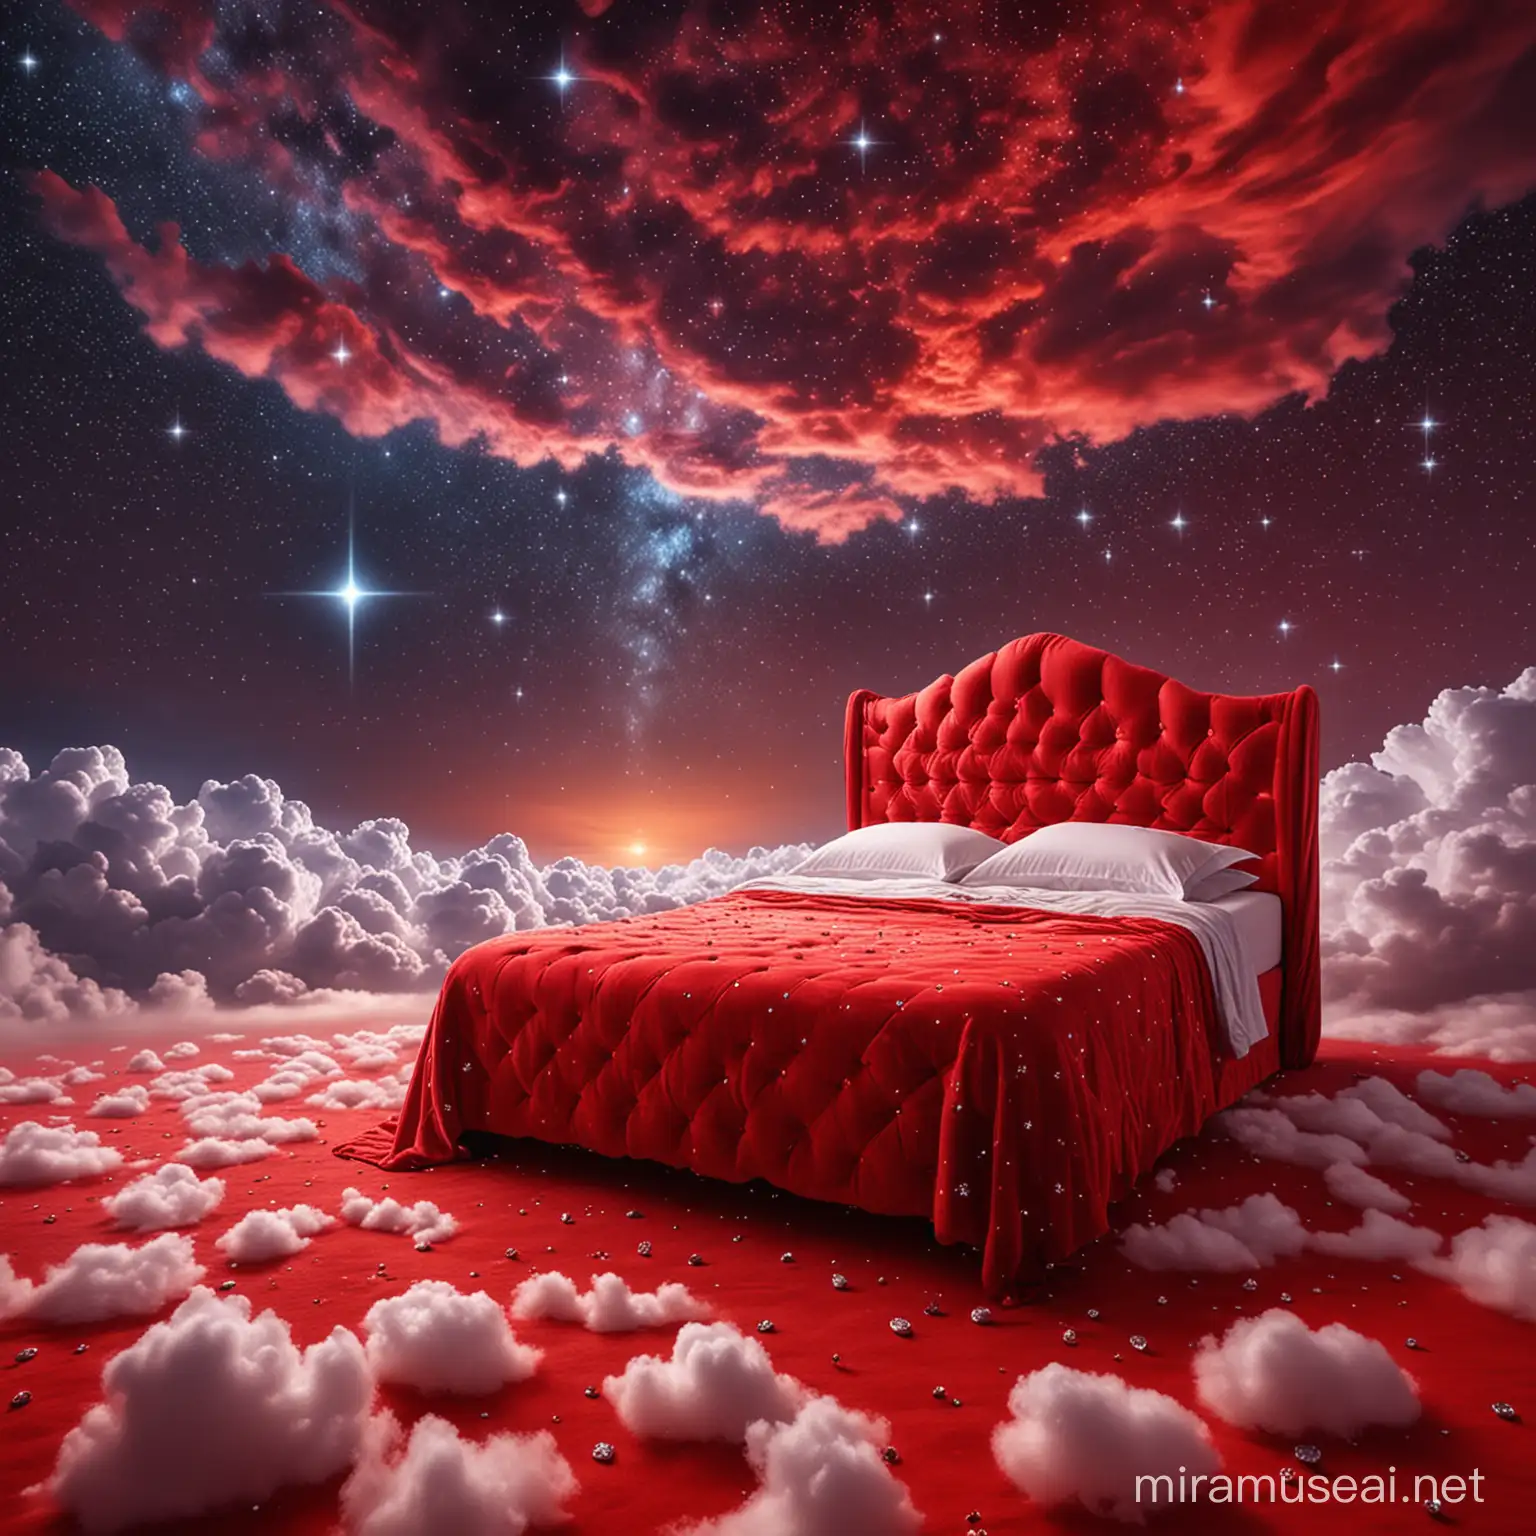 Luxurious Red Bed with DiamondEncrusted Comfort Floating among Celestial Stars and Clouds